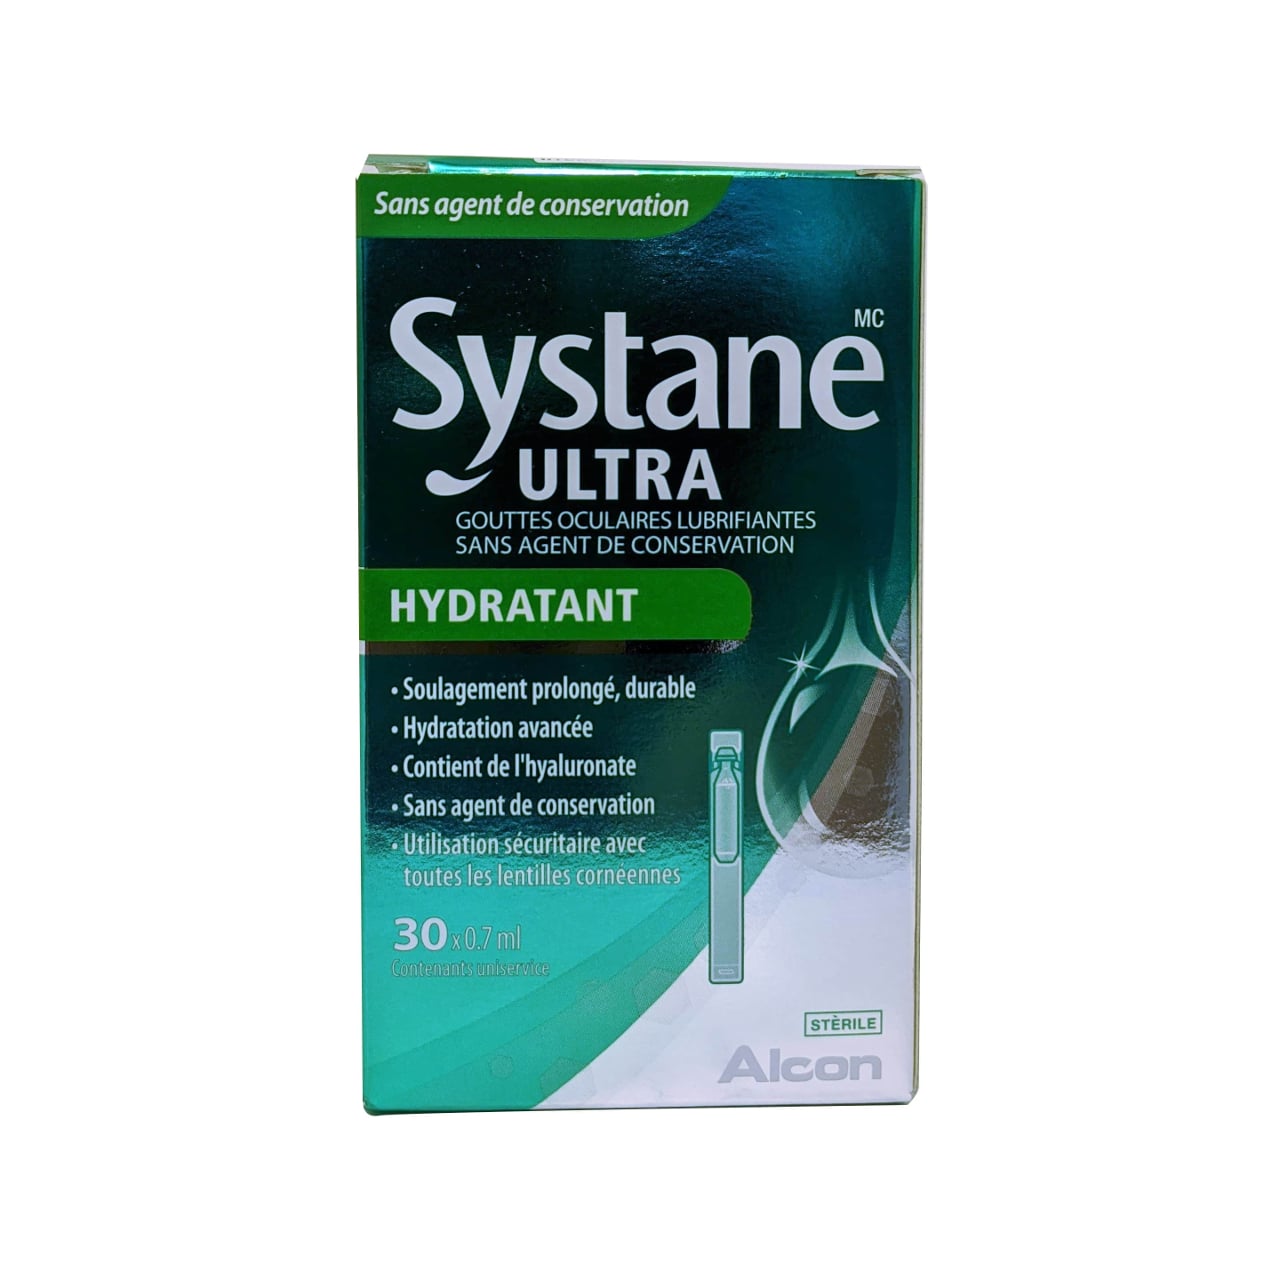 French product label for Alcon Systane Ultra Hydration Lubricant Eye Drops single vials